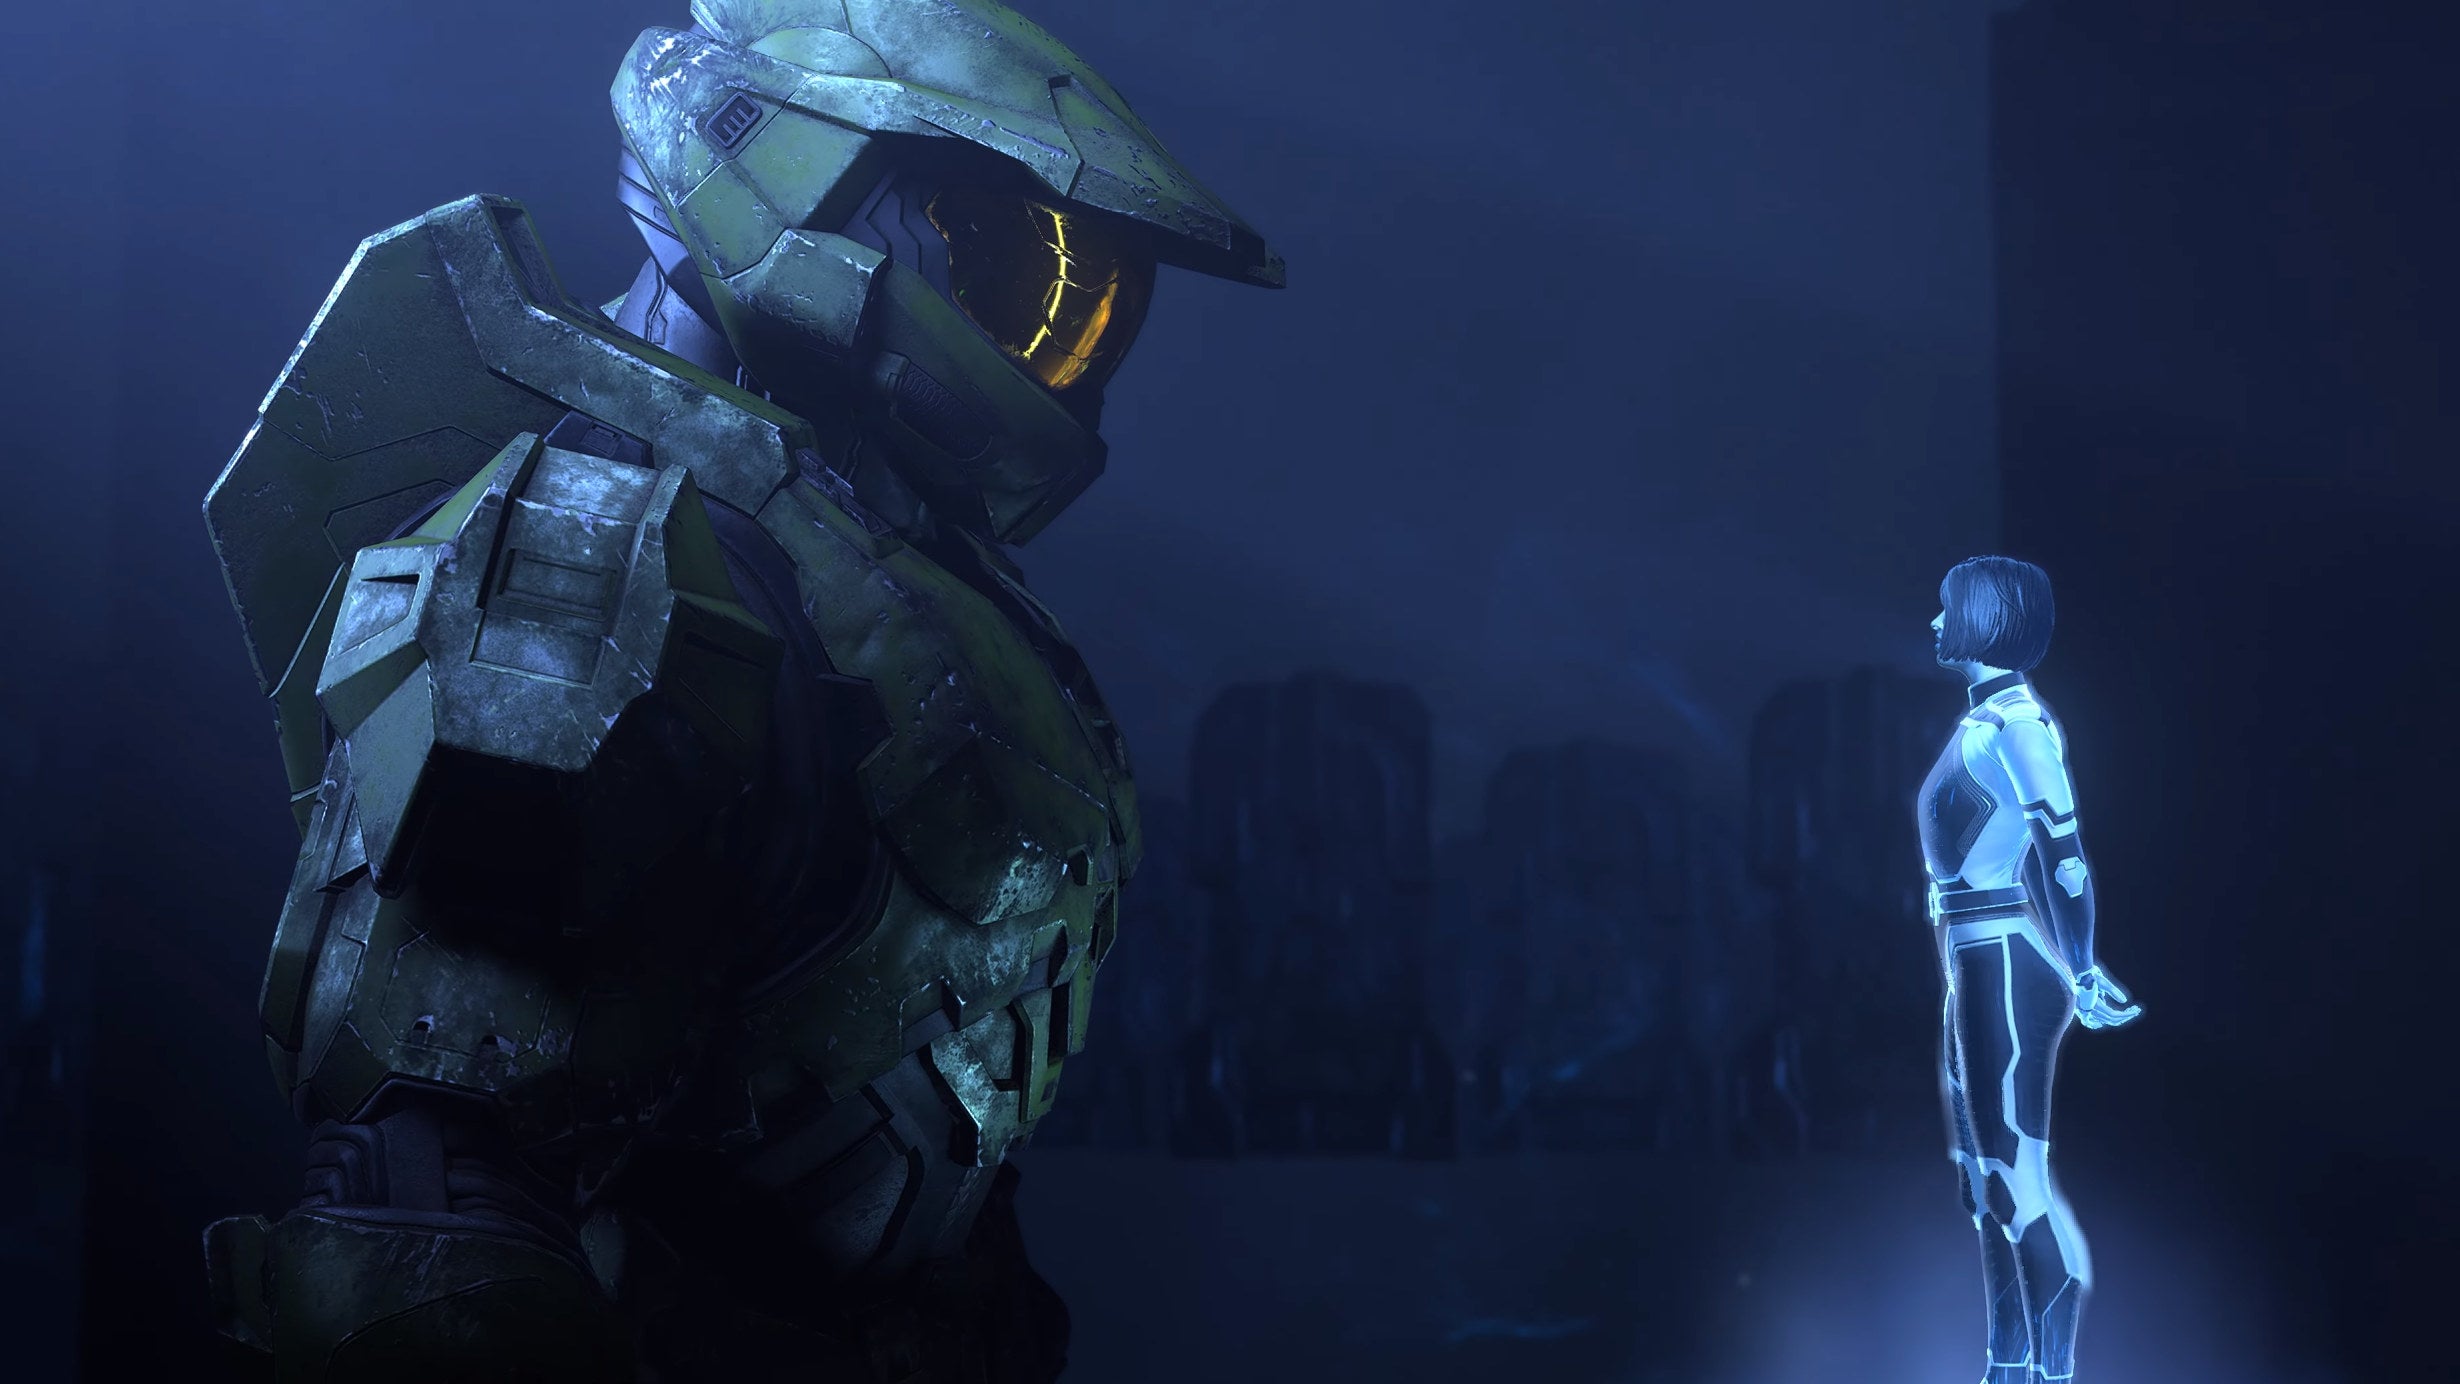 Halo Infinite: PC system requirements and the best settings to use | Rock Paper Shotgun